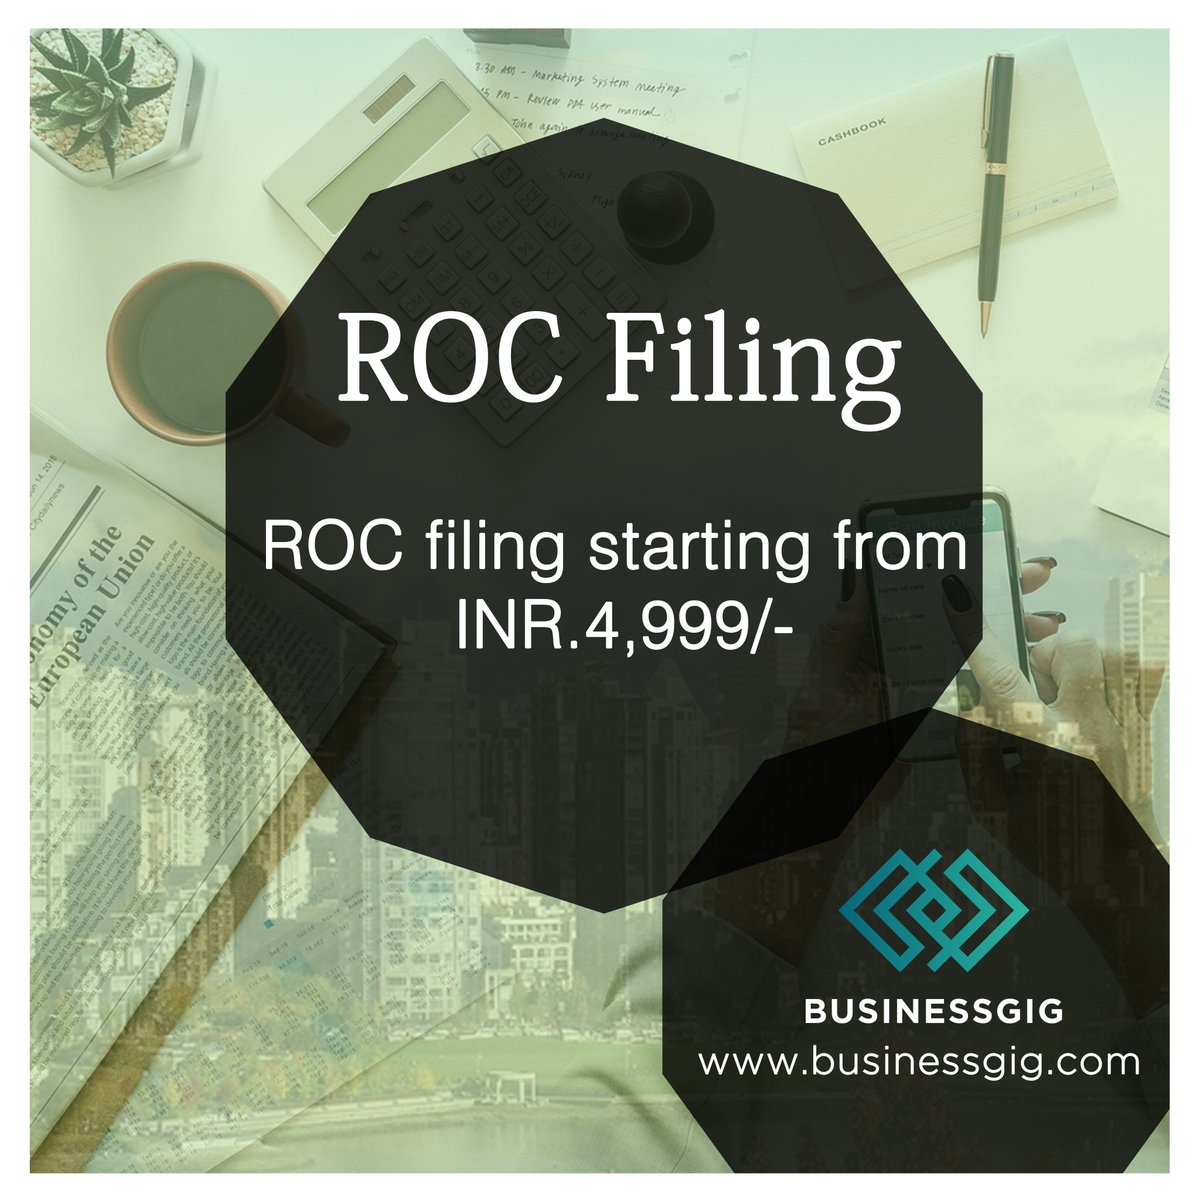 Get expert help in annual returnfiling with the Registrar of Companies in India. To know more about ROC Compliance
businessgig.com/roc-filing-com…
#roc #rocfiling #rocfilingcompany #rocfilingllp #businessgig #startupindia #spreadtheword